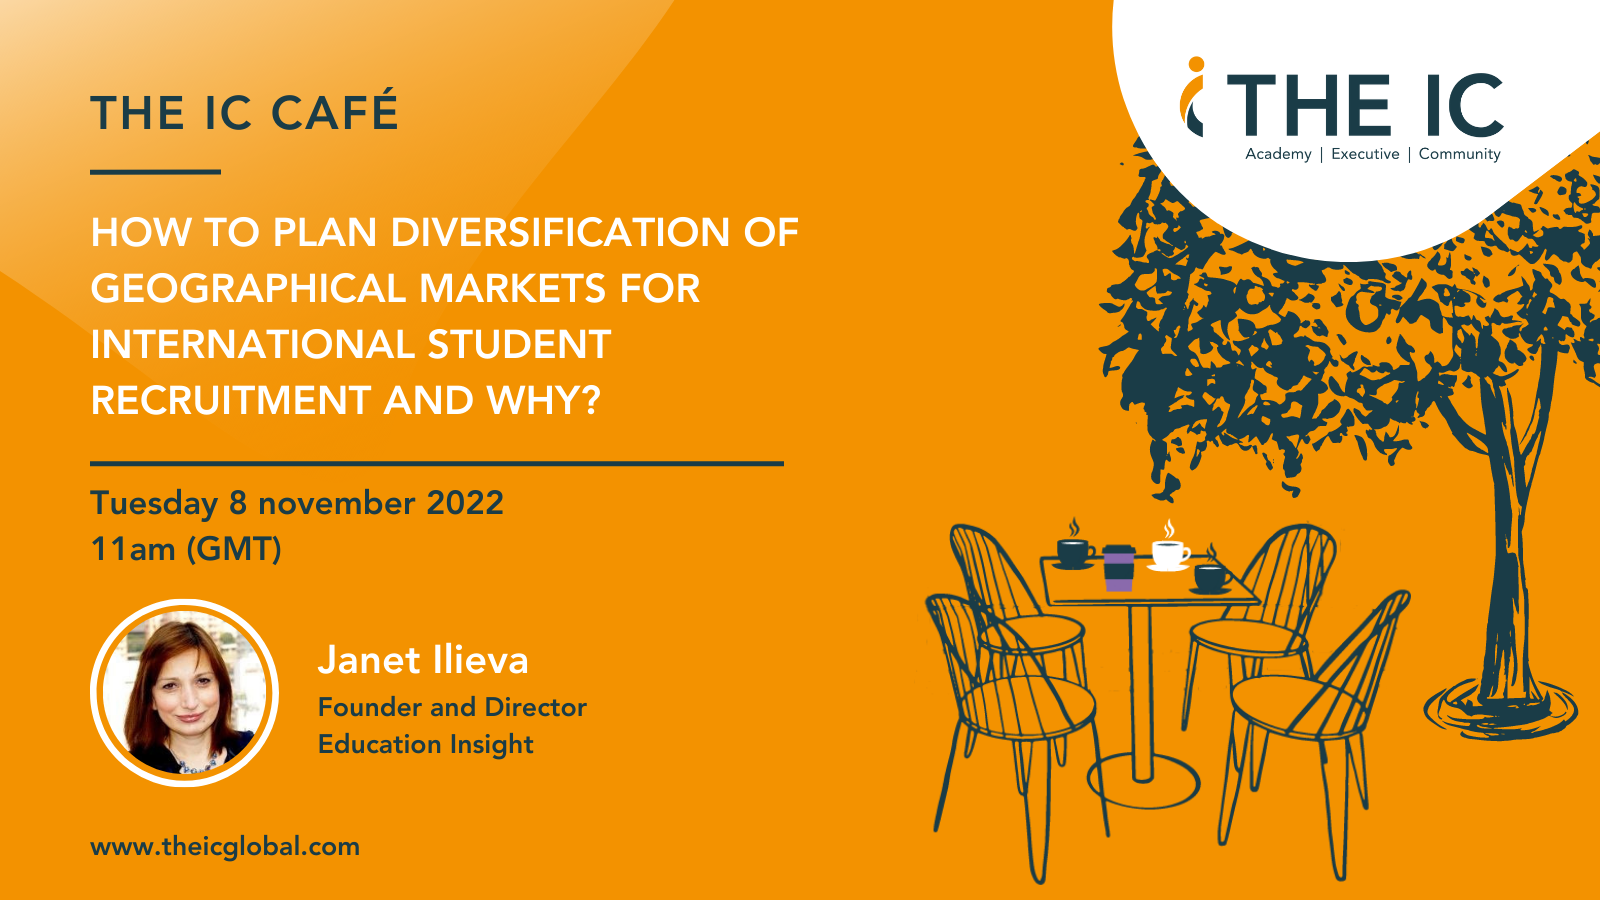 How to plan diversification of geographical markets for international student recruitment and why?